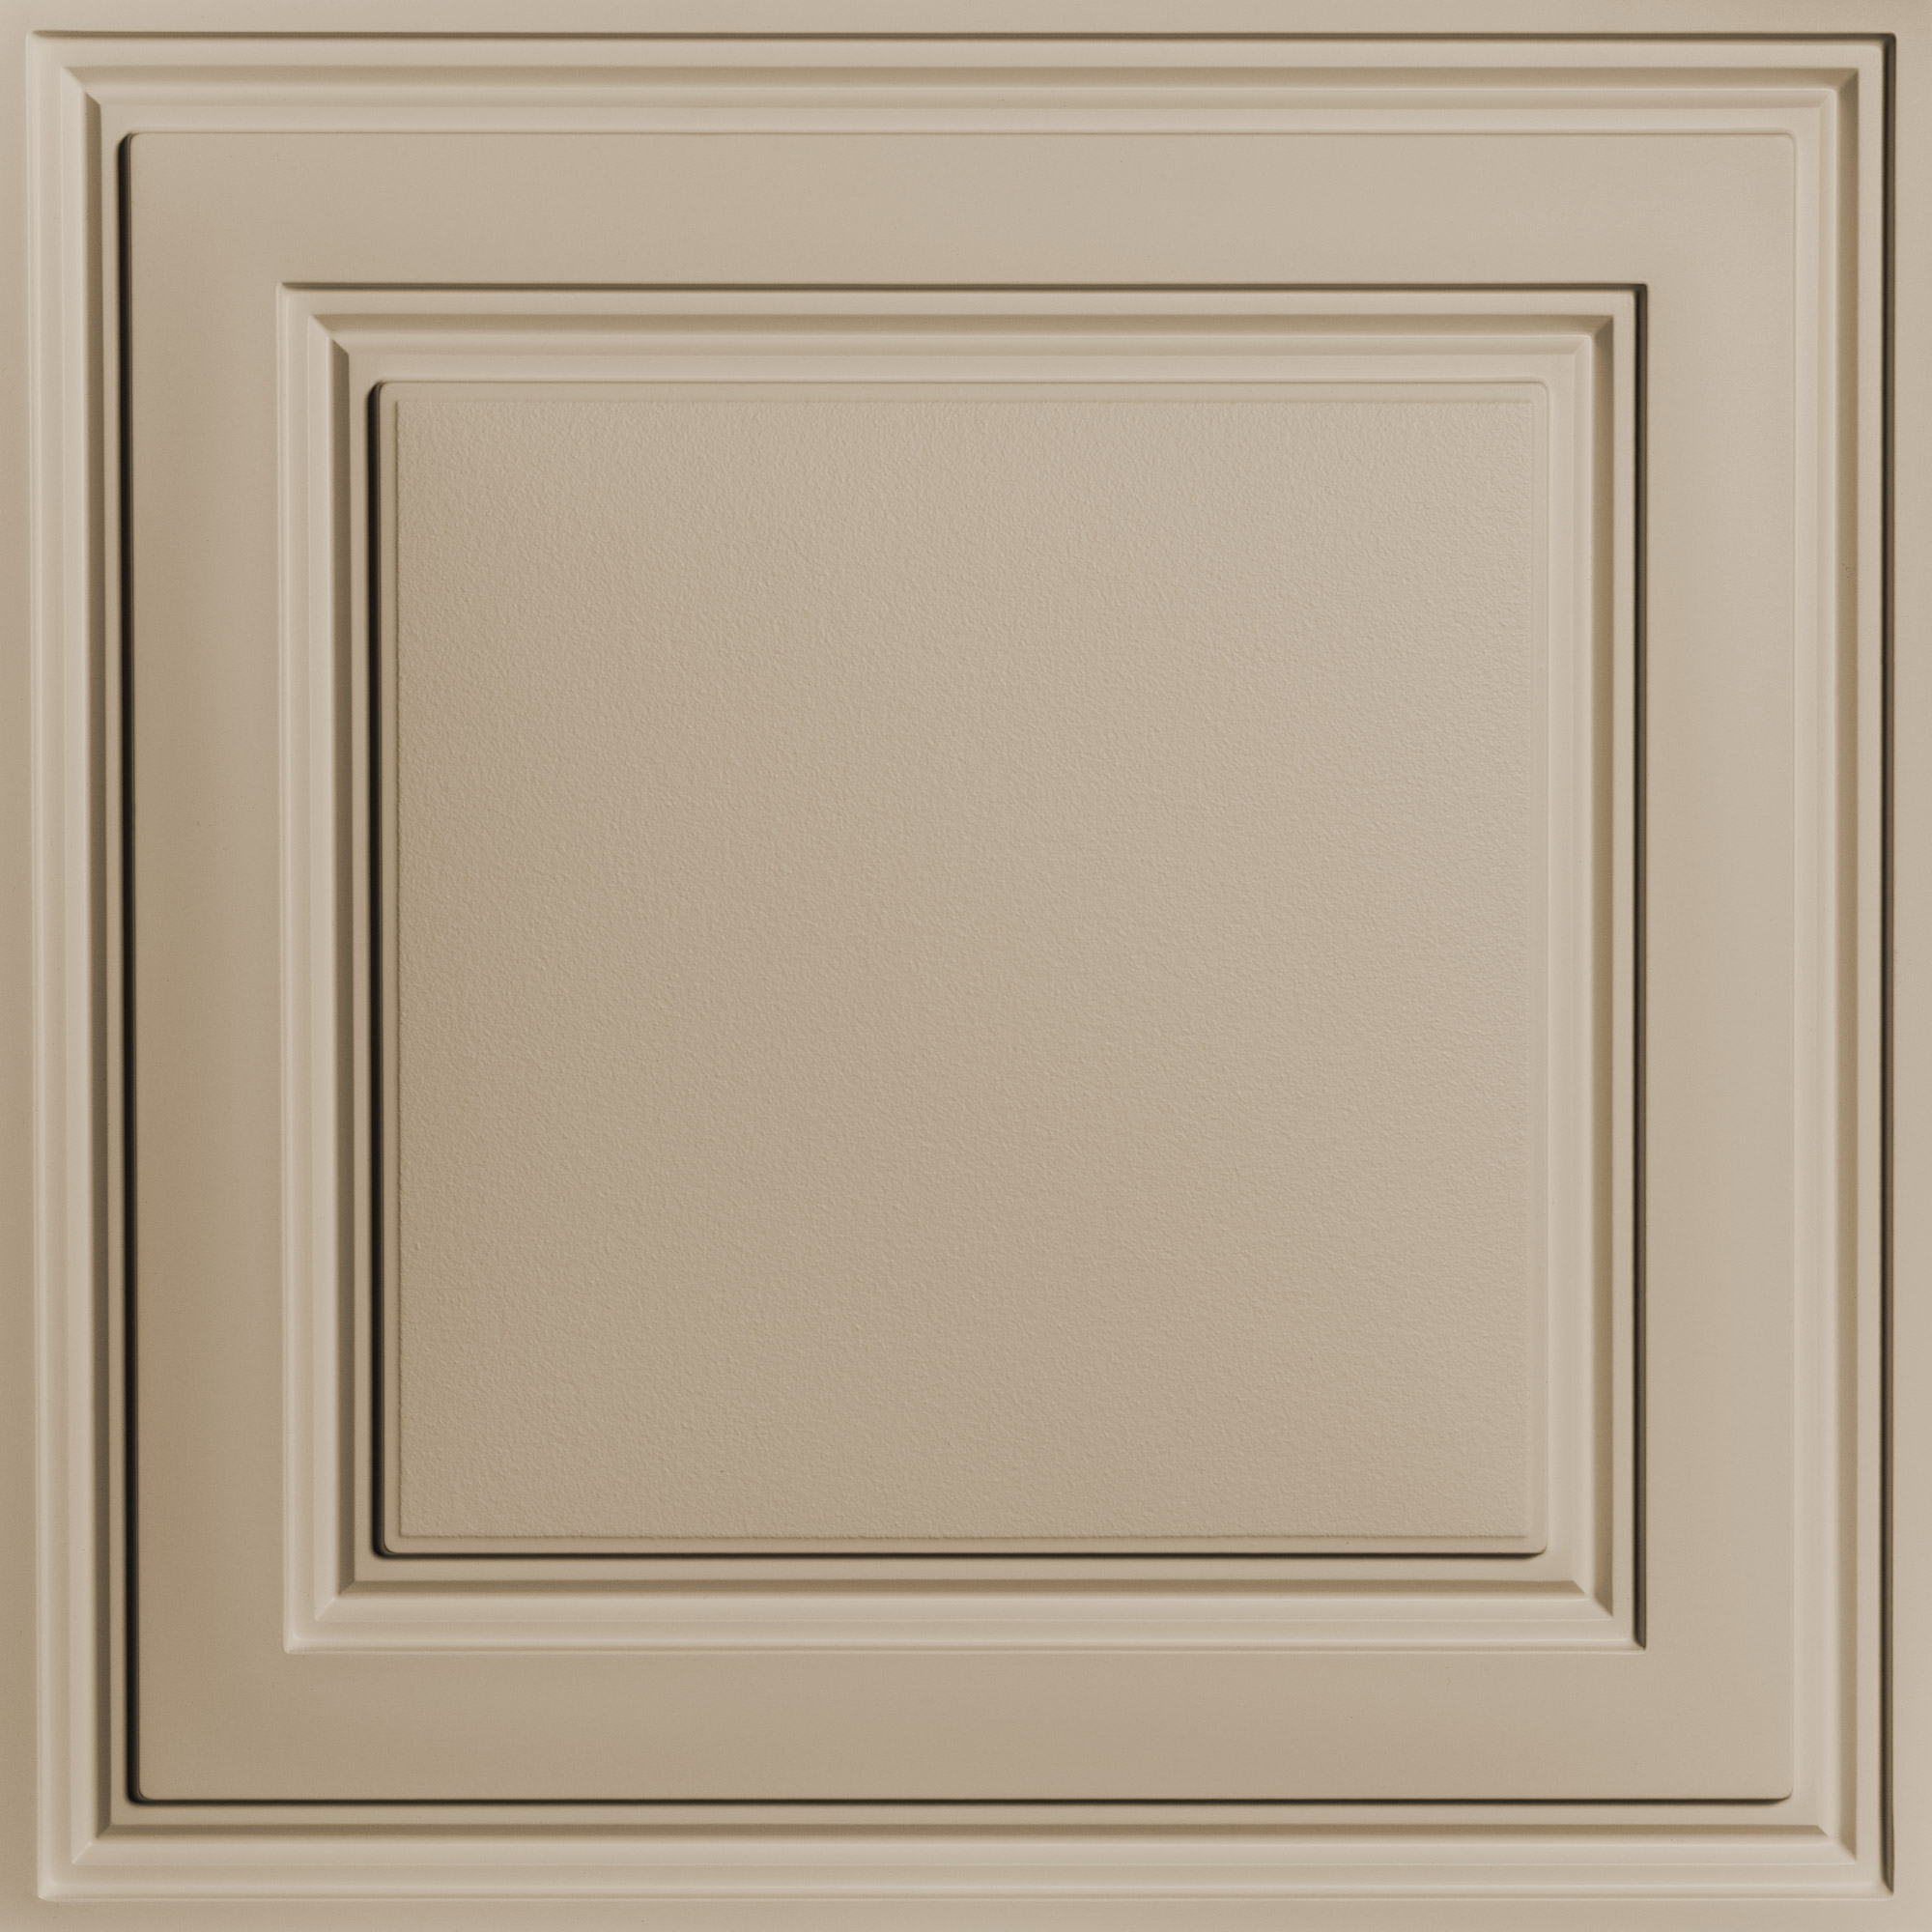 Ceilume Stratford Ceiling Tiles Wholesale Pricing Free Shipping